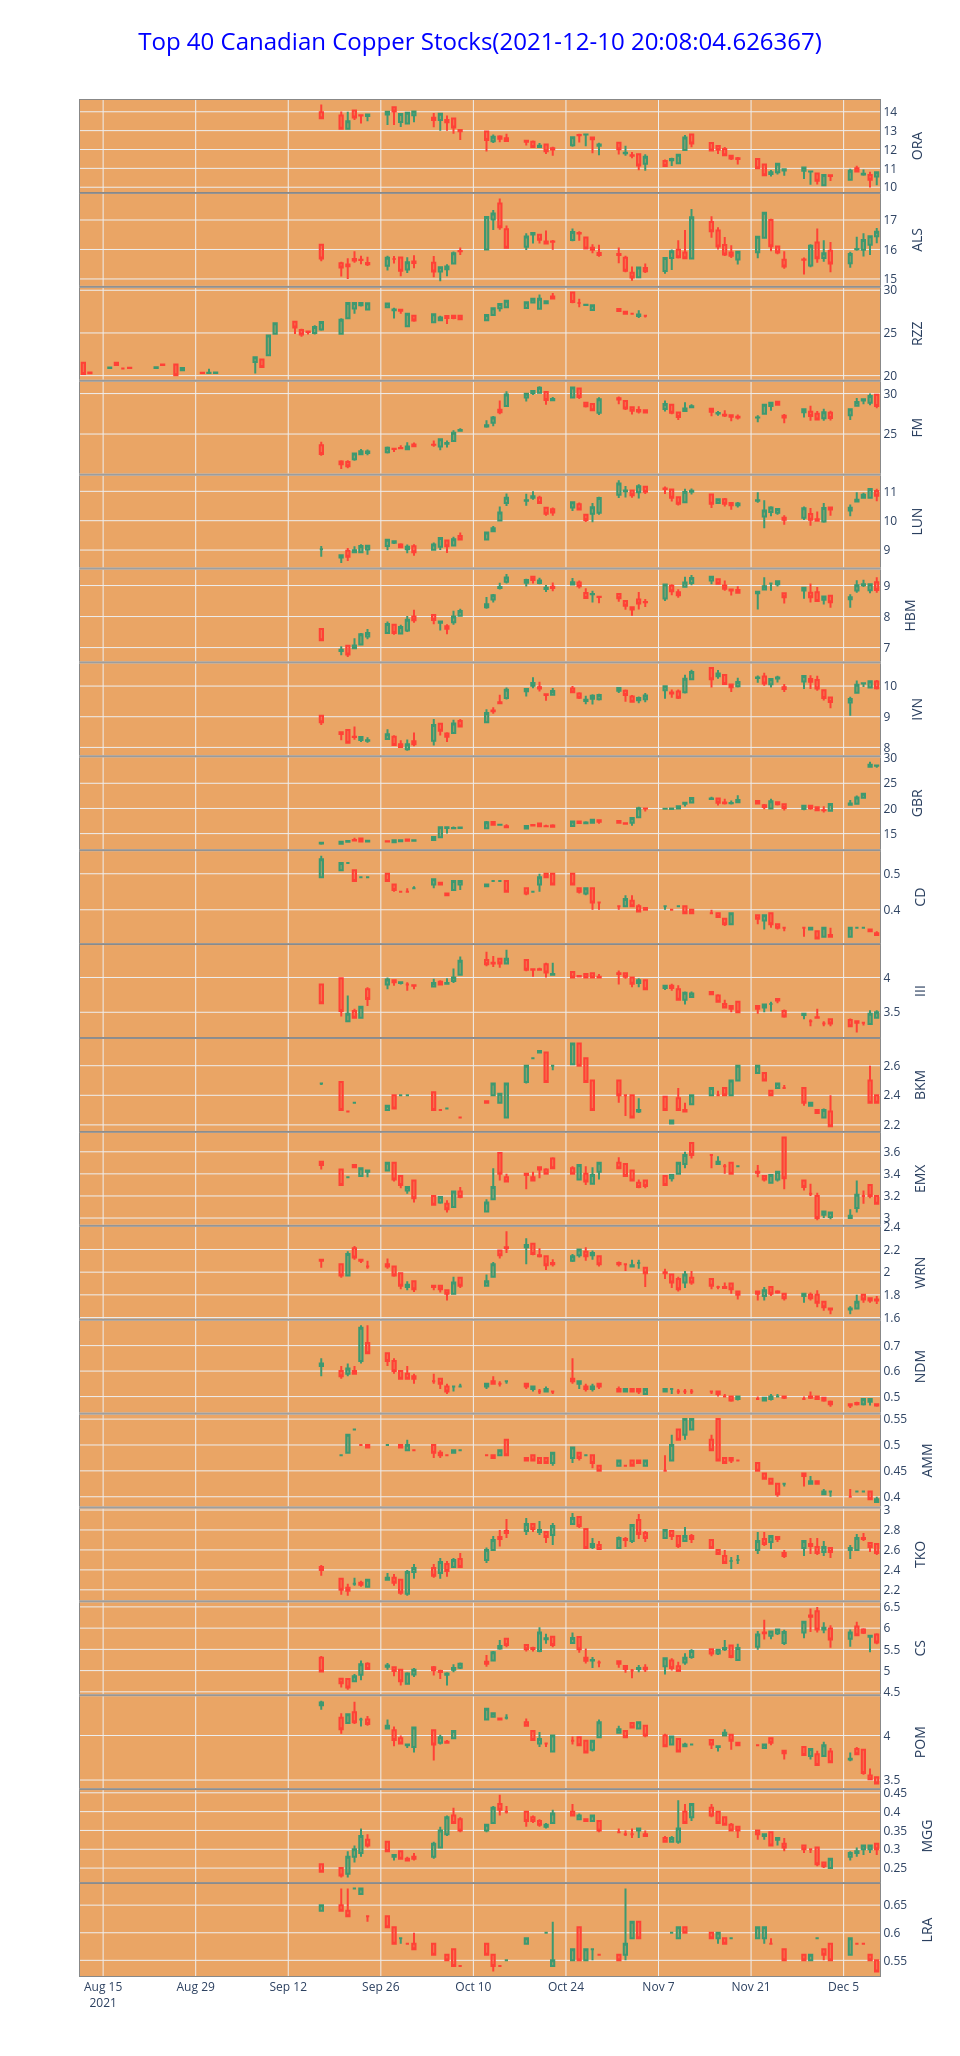 Top 40 Canadian Copper Stocks(2021-12-10 20:08:04.626367) | candlestick made by Ziwang | plotly